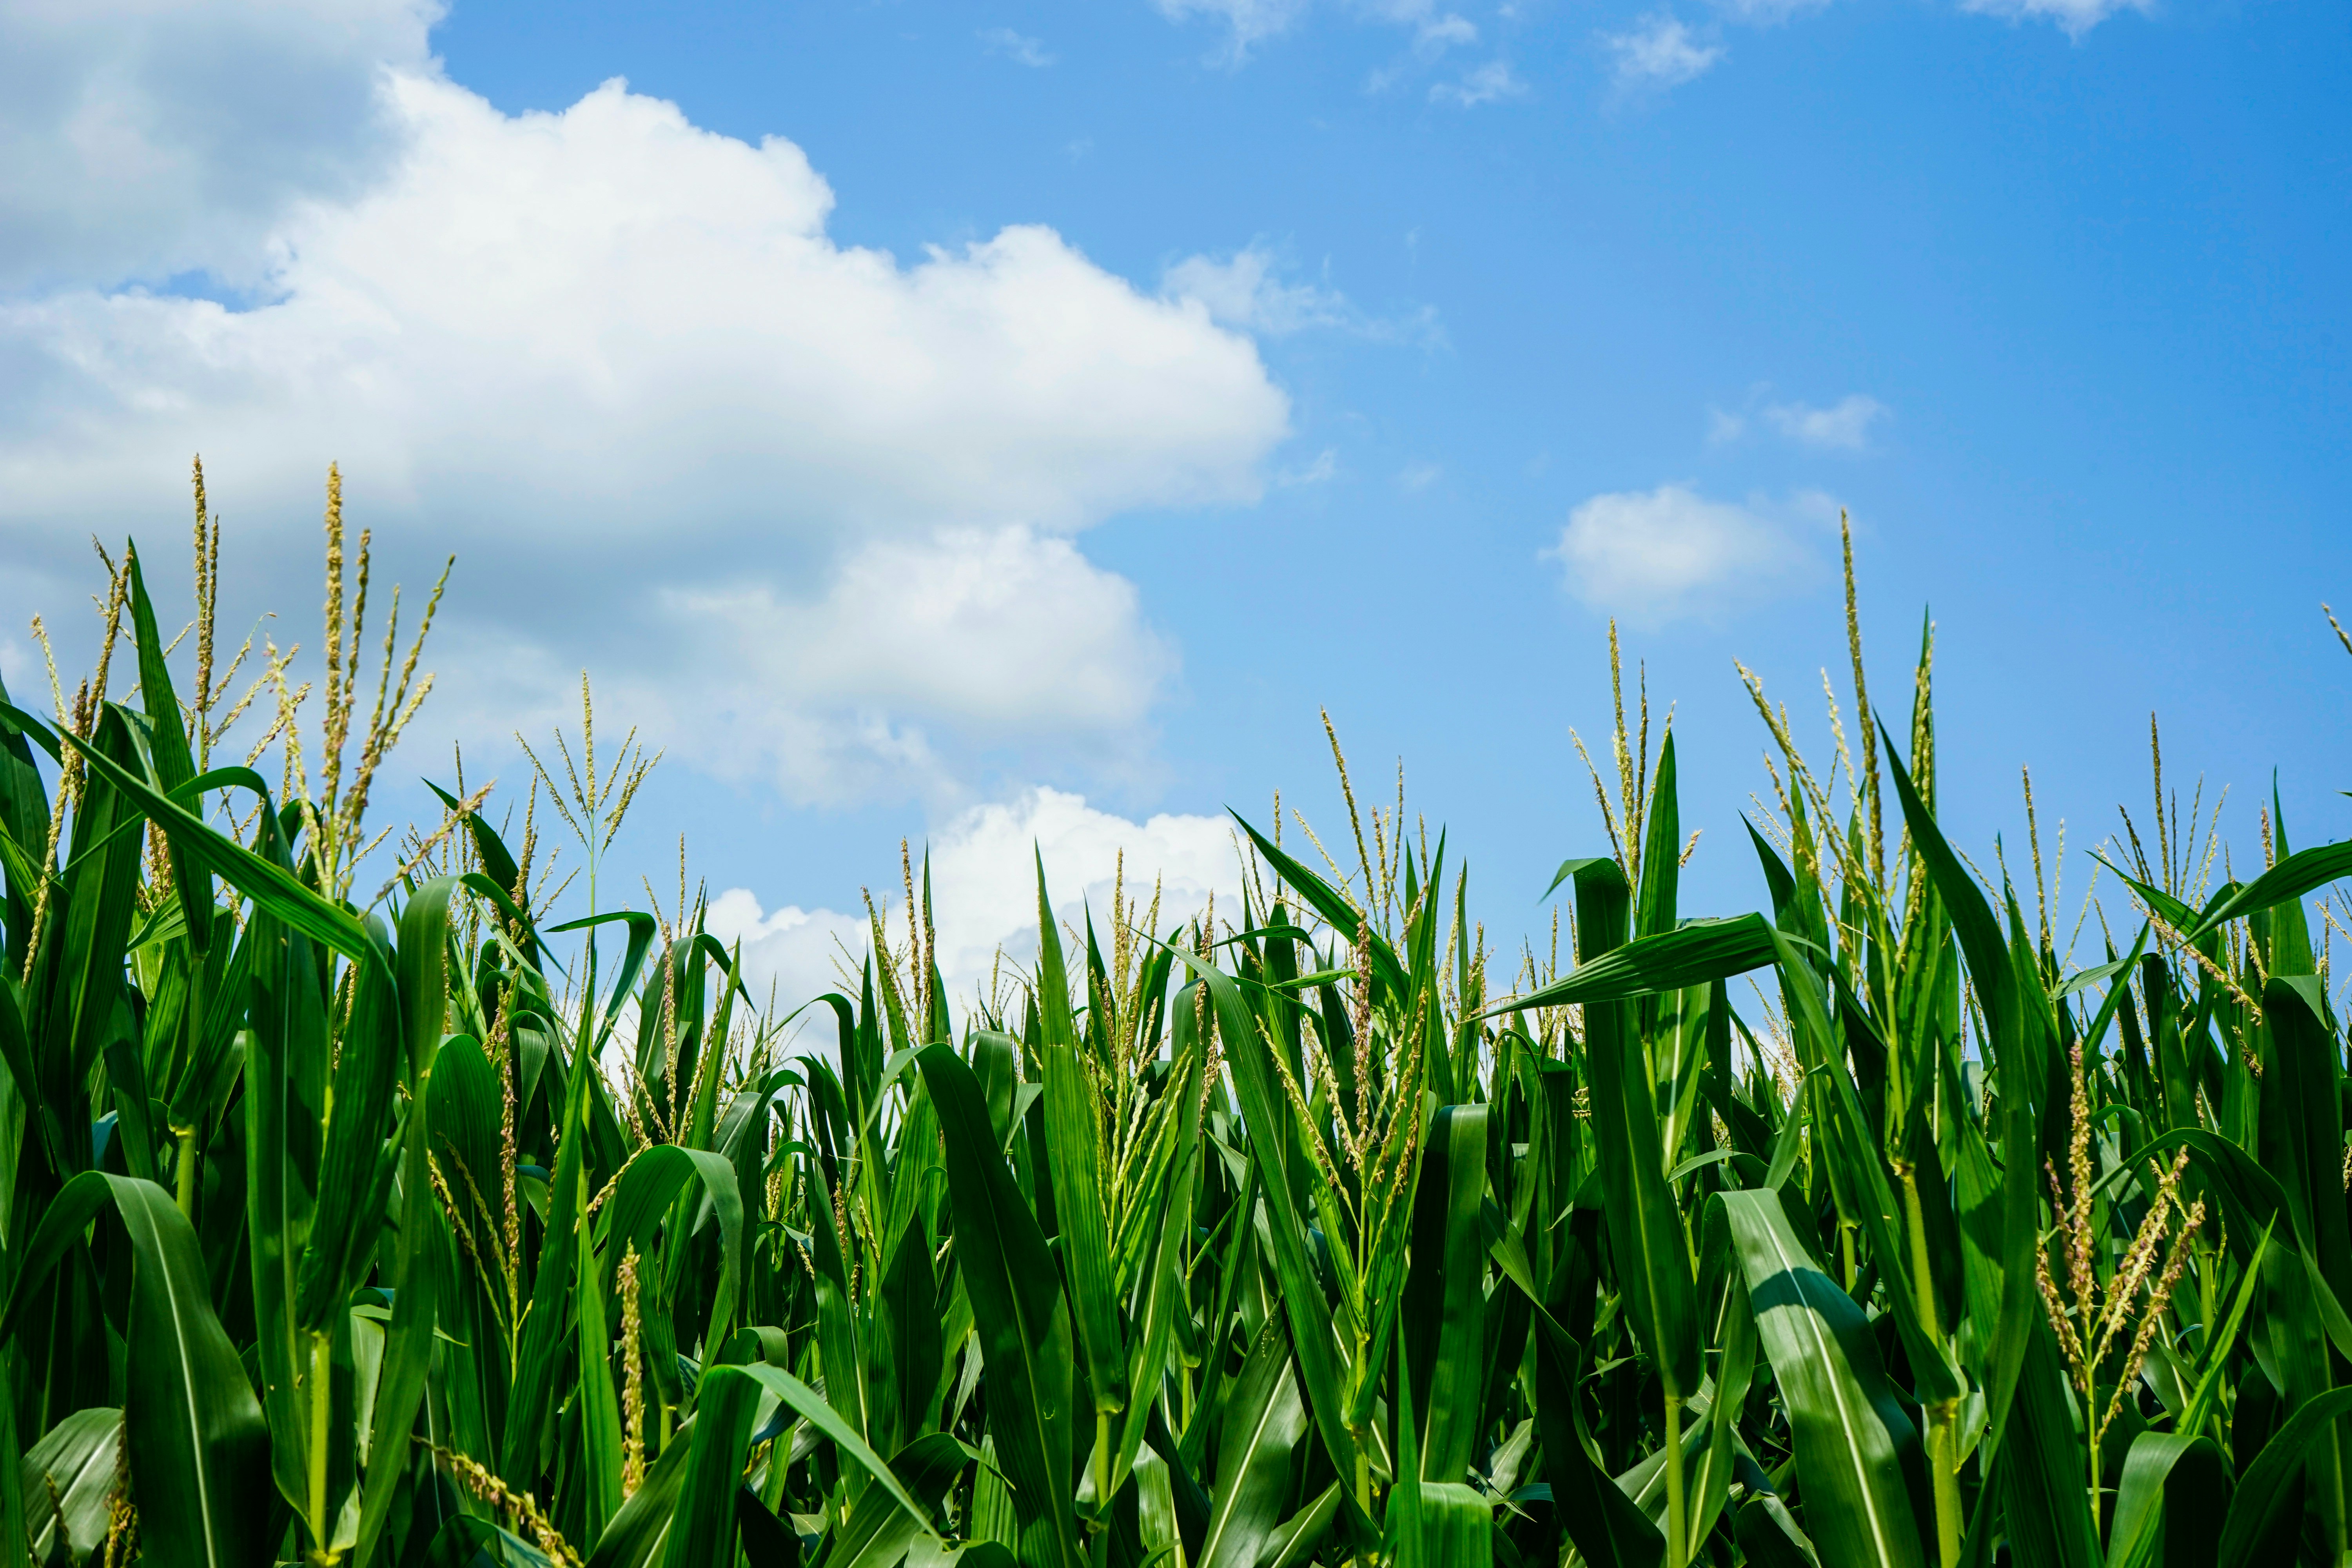 green corn field under white clouds and blue sky during daytime